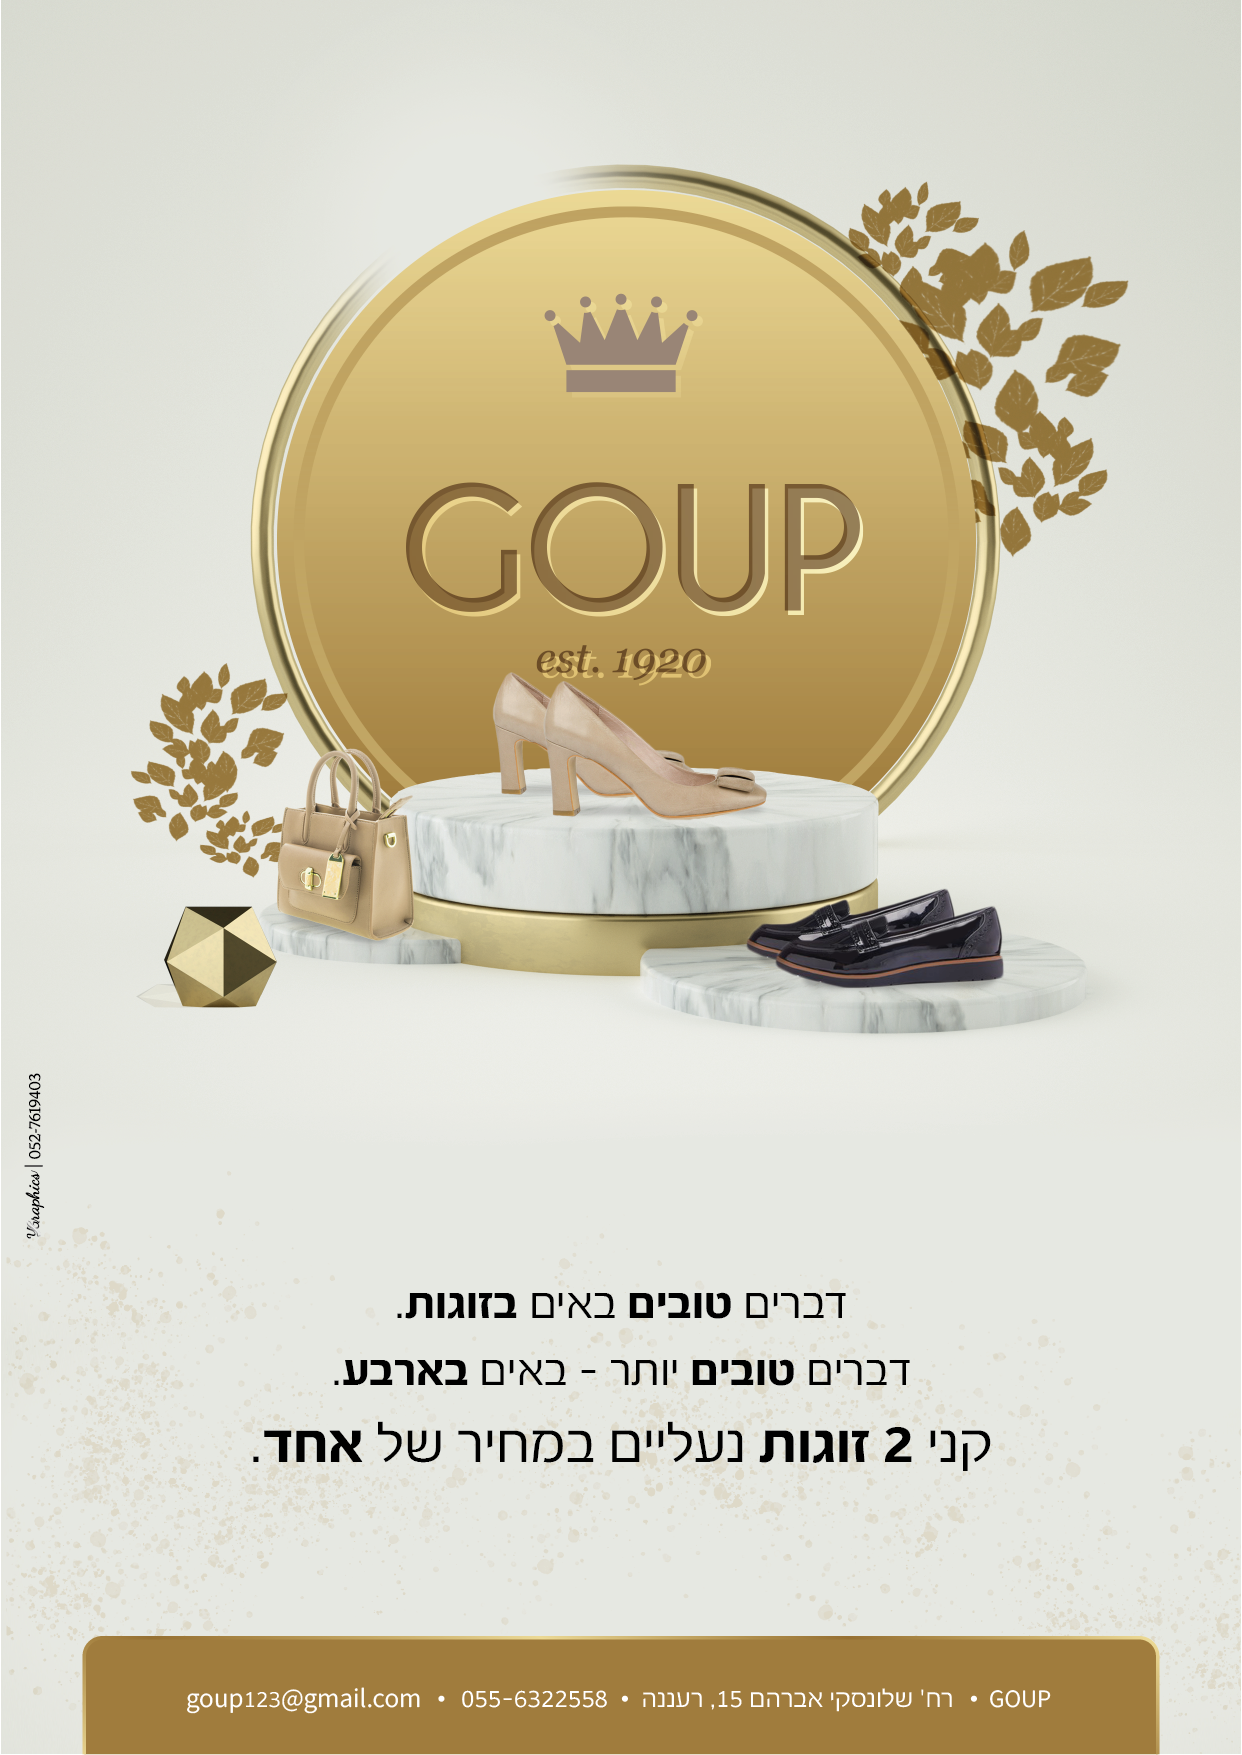 goup ad 3-01-01-01.png